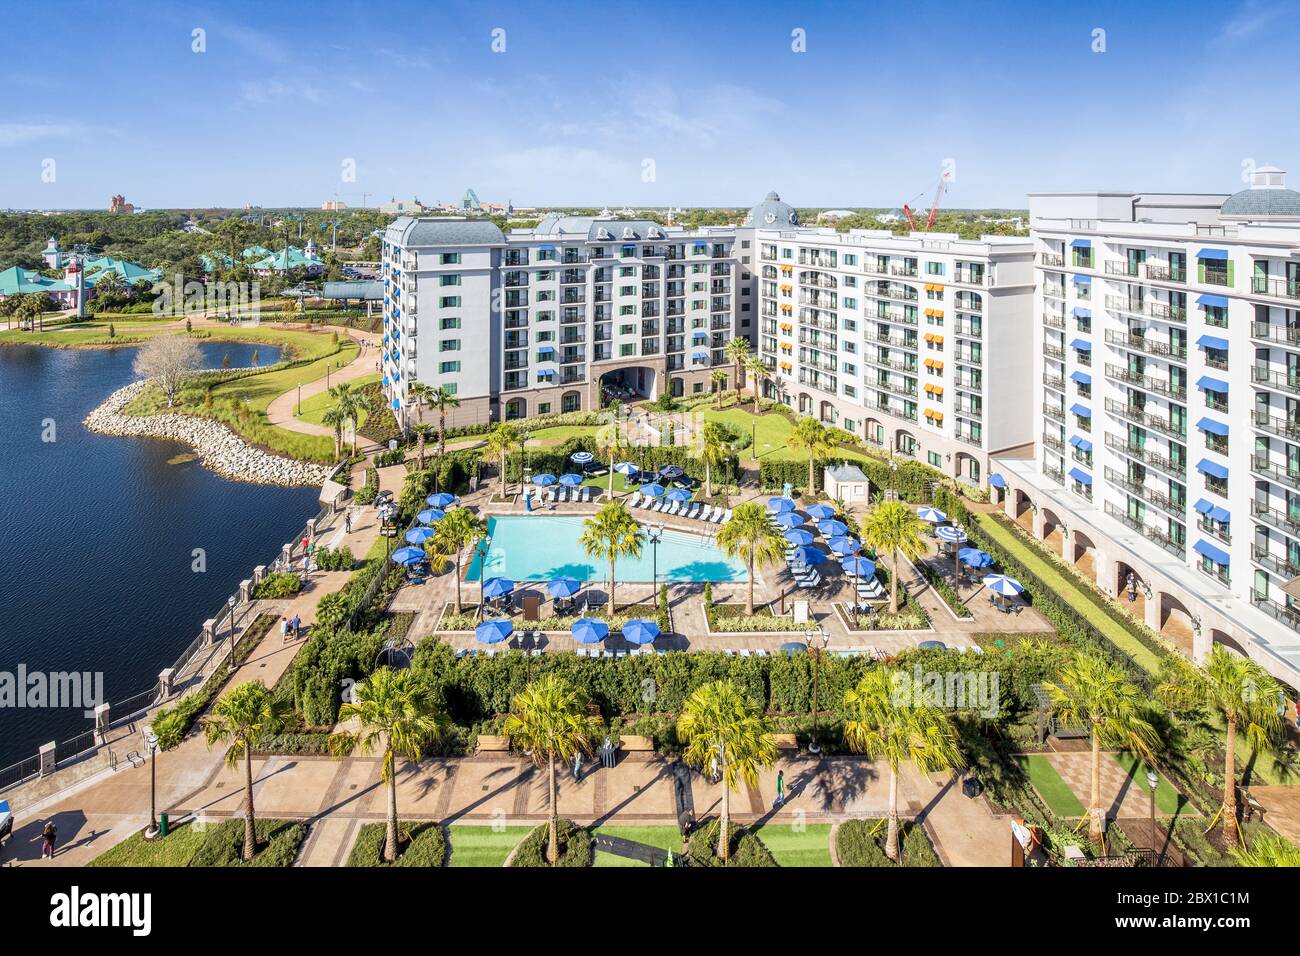 Aerial / drone view of Disney's Riviera Resort. The resort opened in Fall 2019 and within walking distance to Disney's new Skyliner Transportation. Stock Photo